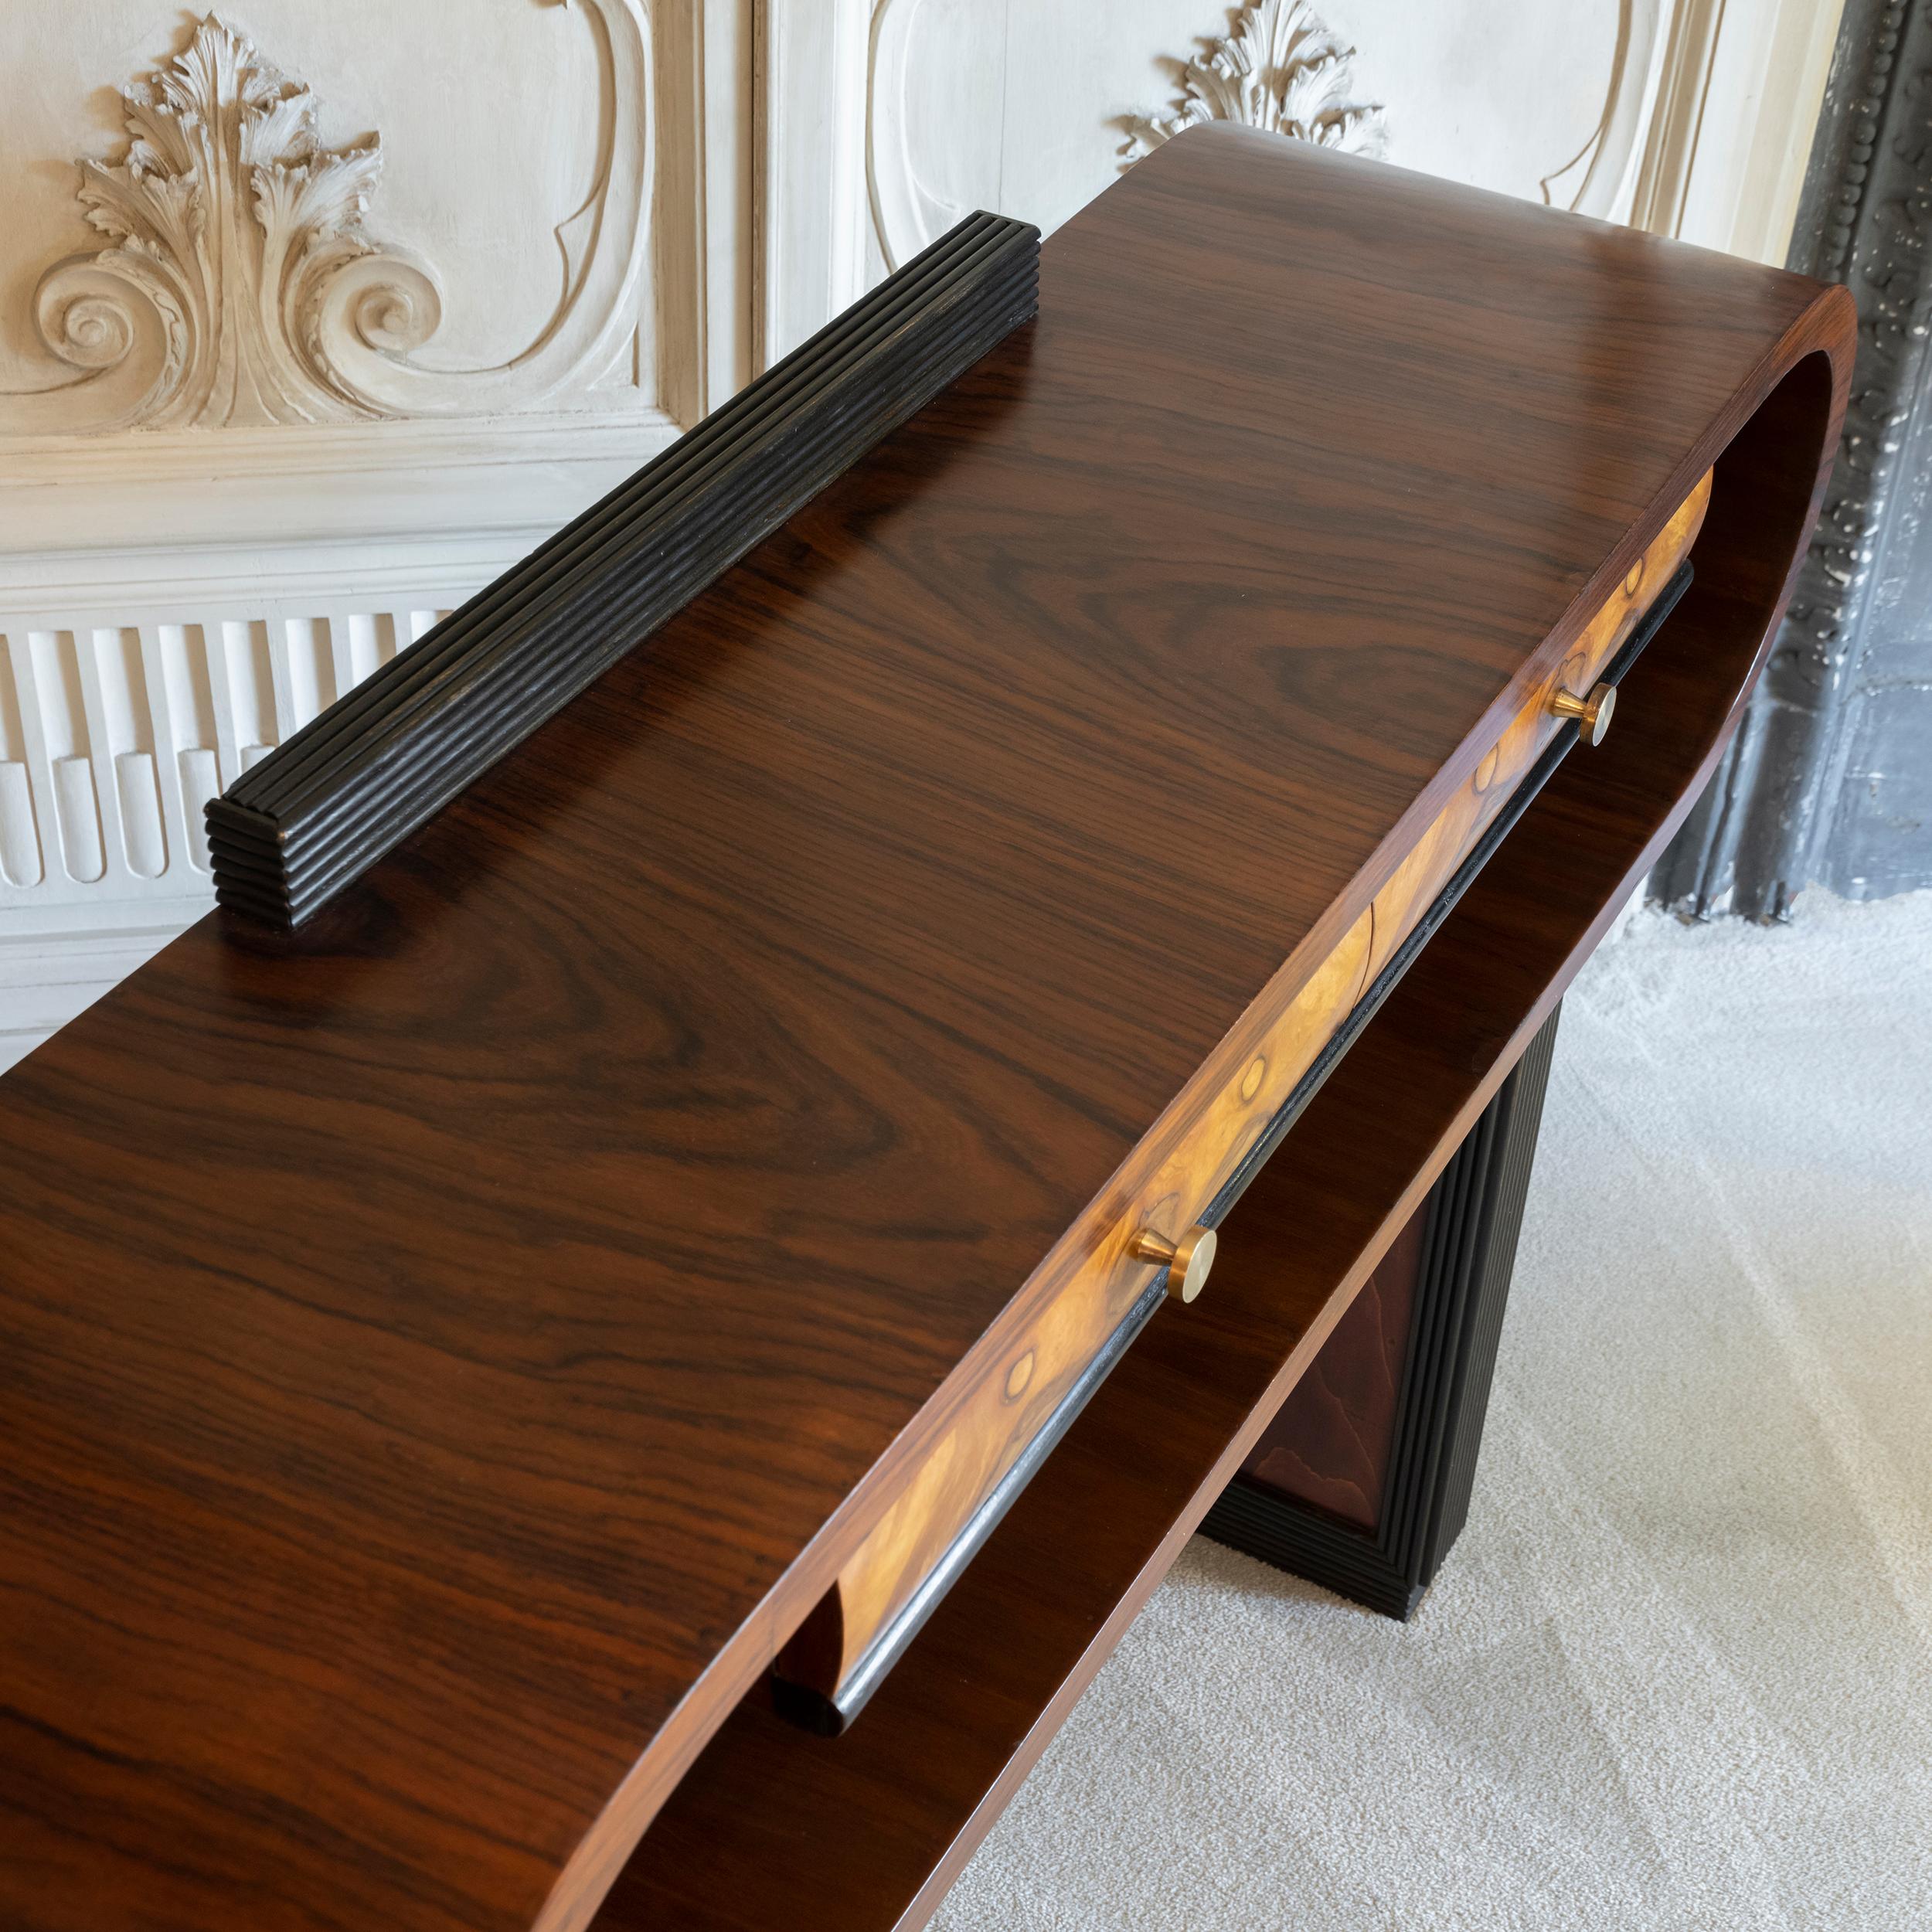 1930s Italian Deco Console Table with Drawers Palisander, Mahogany and Walnut For Sale 12